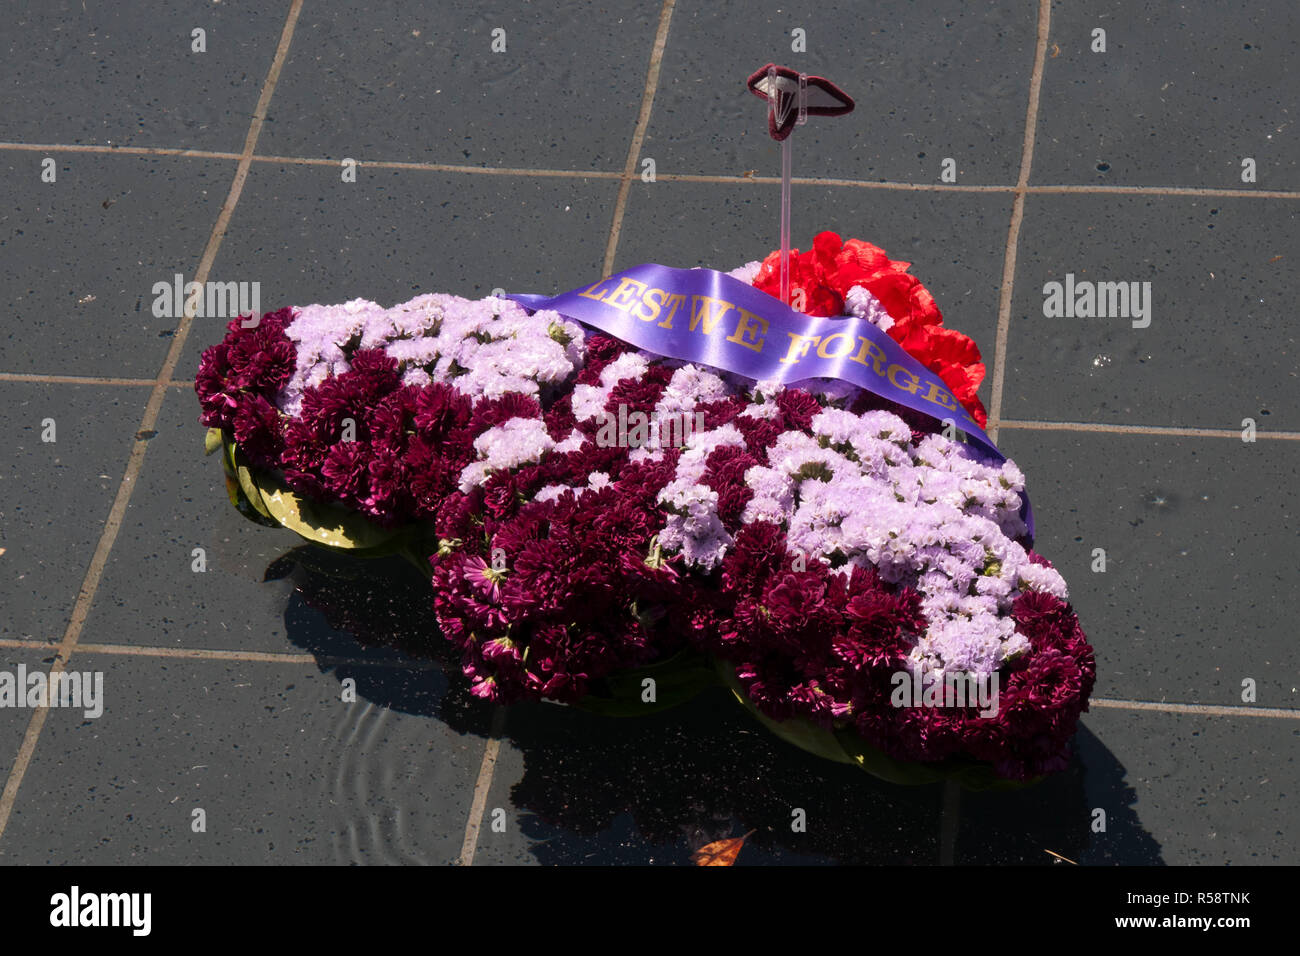 Sydney Australia Nov 11 2018, memorial wreath shaped like an airplane floating in the pool of remembrance at the ANZAC Memorial, Hyde Park Stock Photo